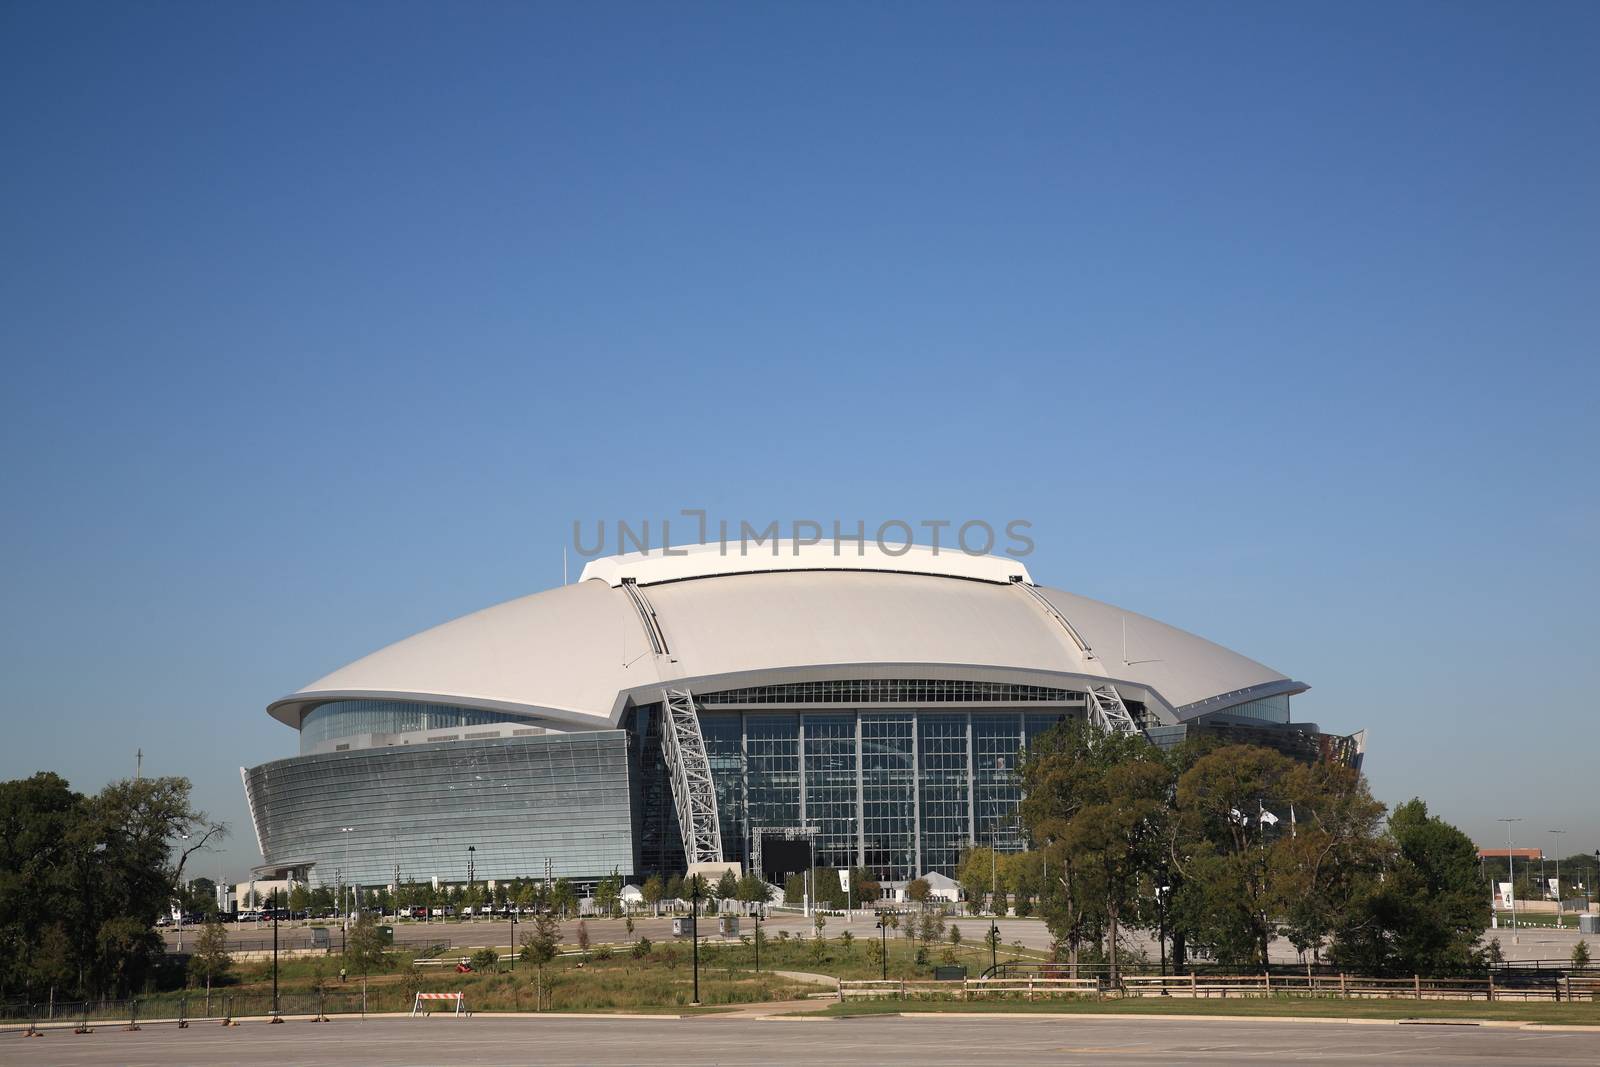 AT&T Dallas Cowboys Stadium by Ffooter